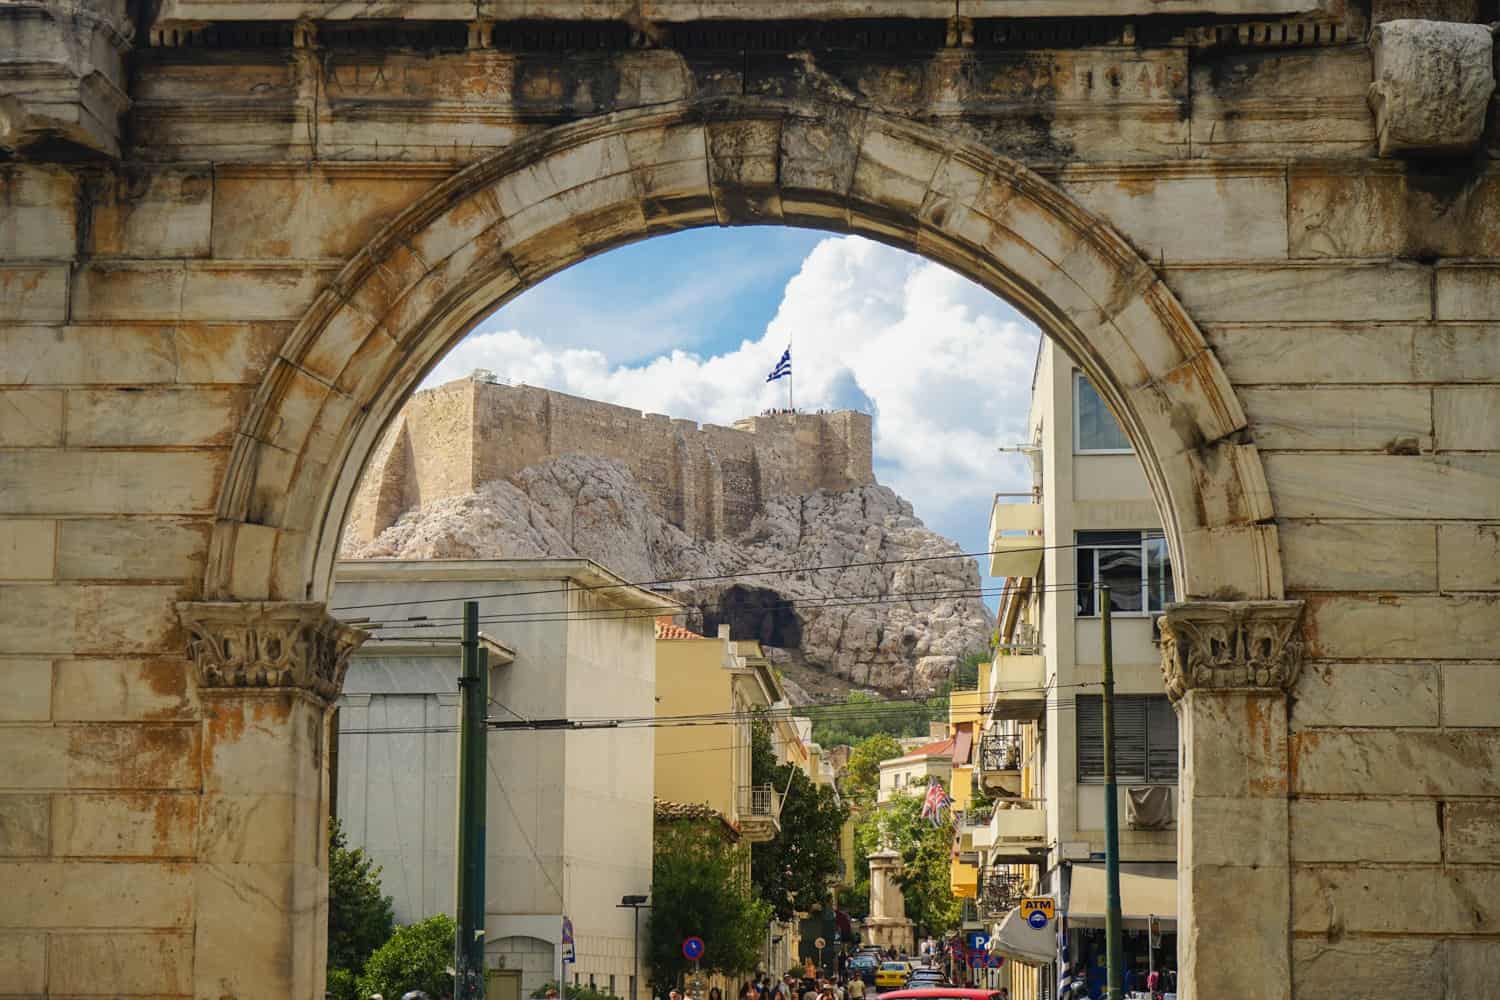 Hadrian's Gate and the Acropolis